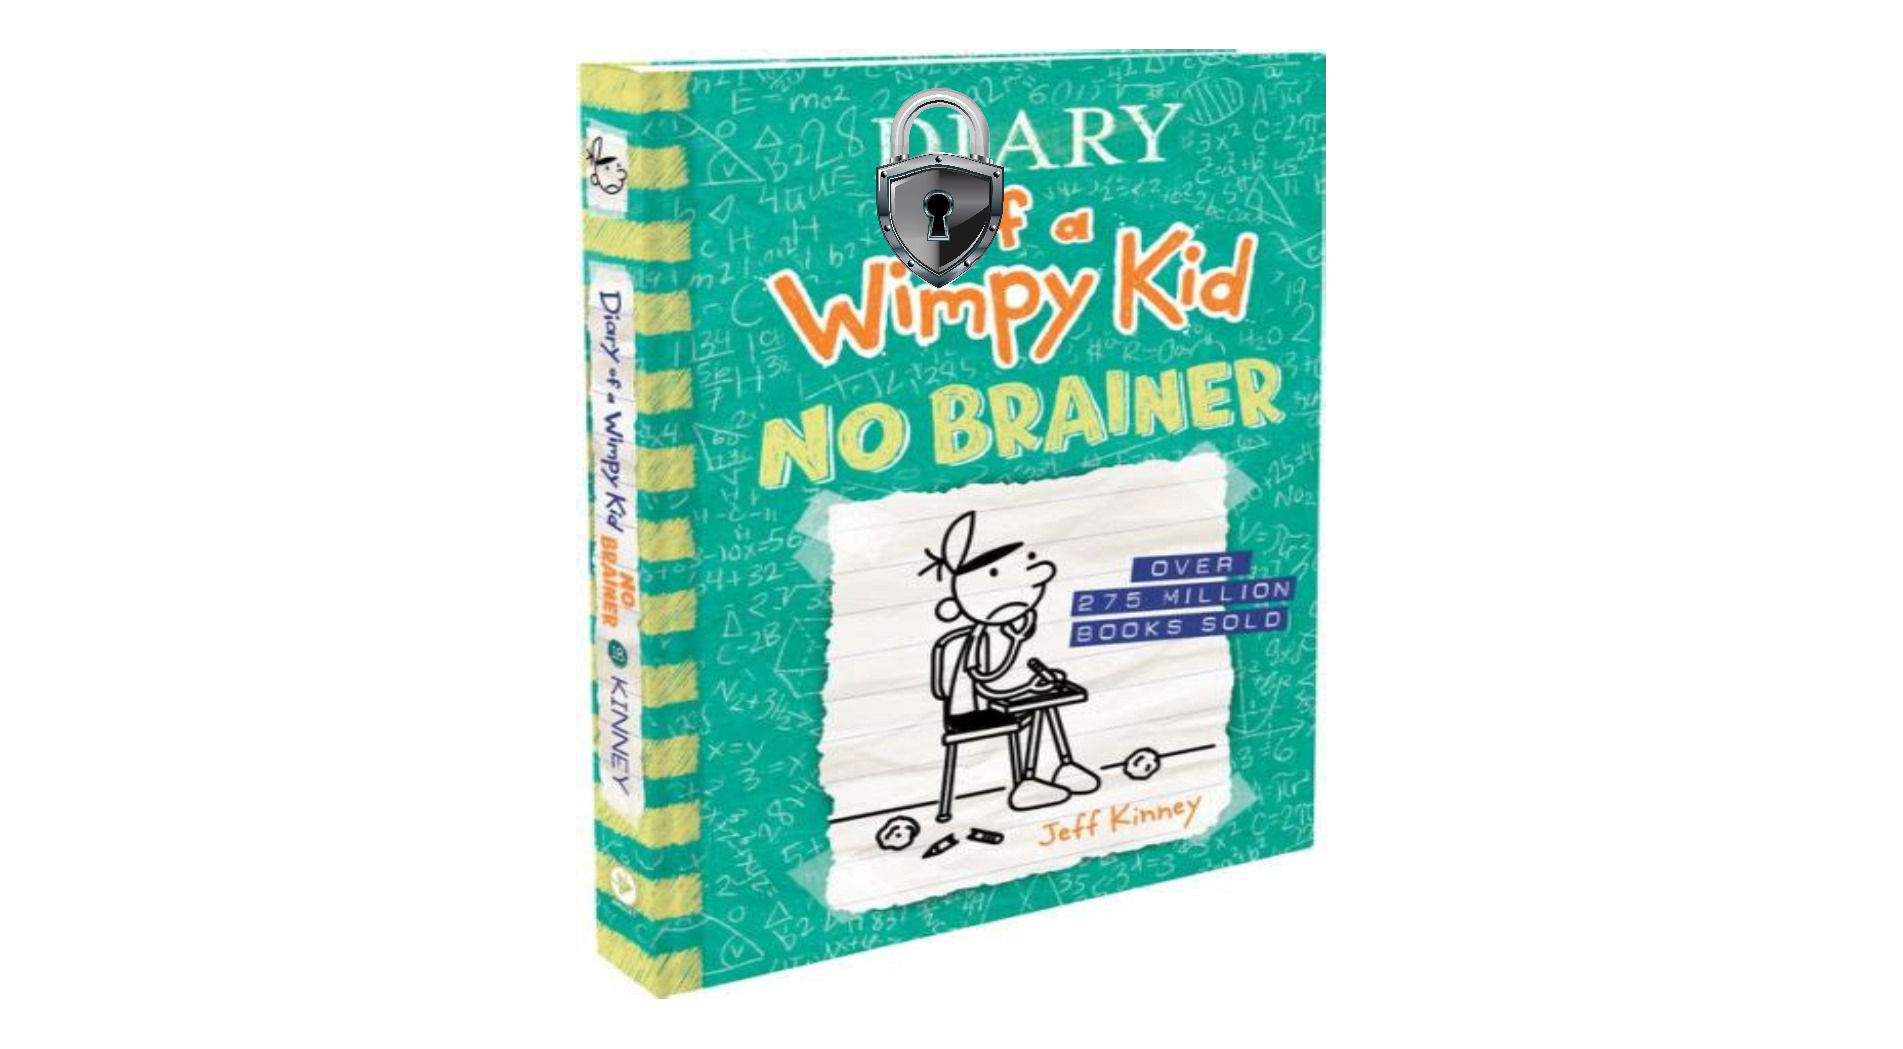 Download [pdf] Free - No Brainer (Diary of a Wimpy Kid, #18) by Jeff Kinney  : riverwilliams1